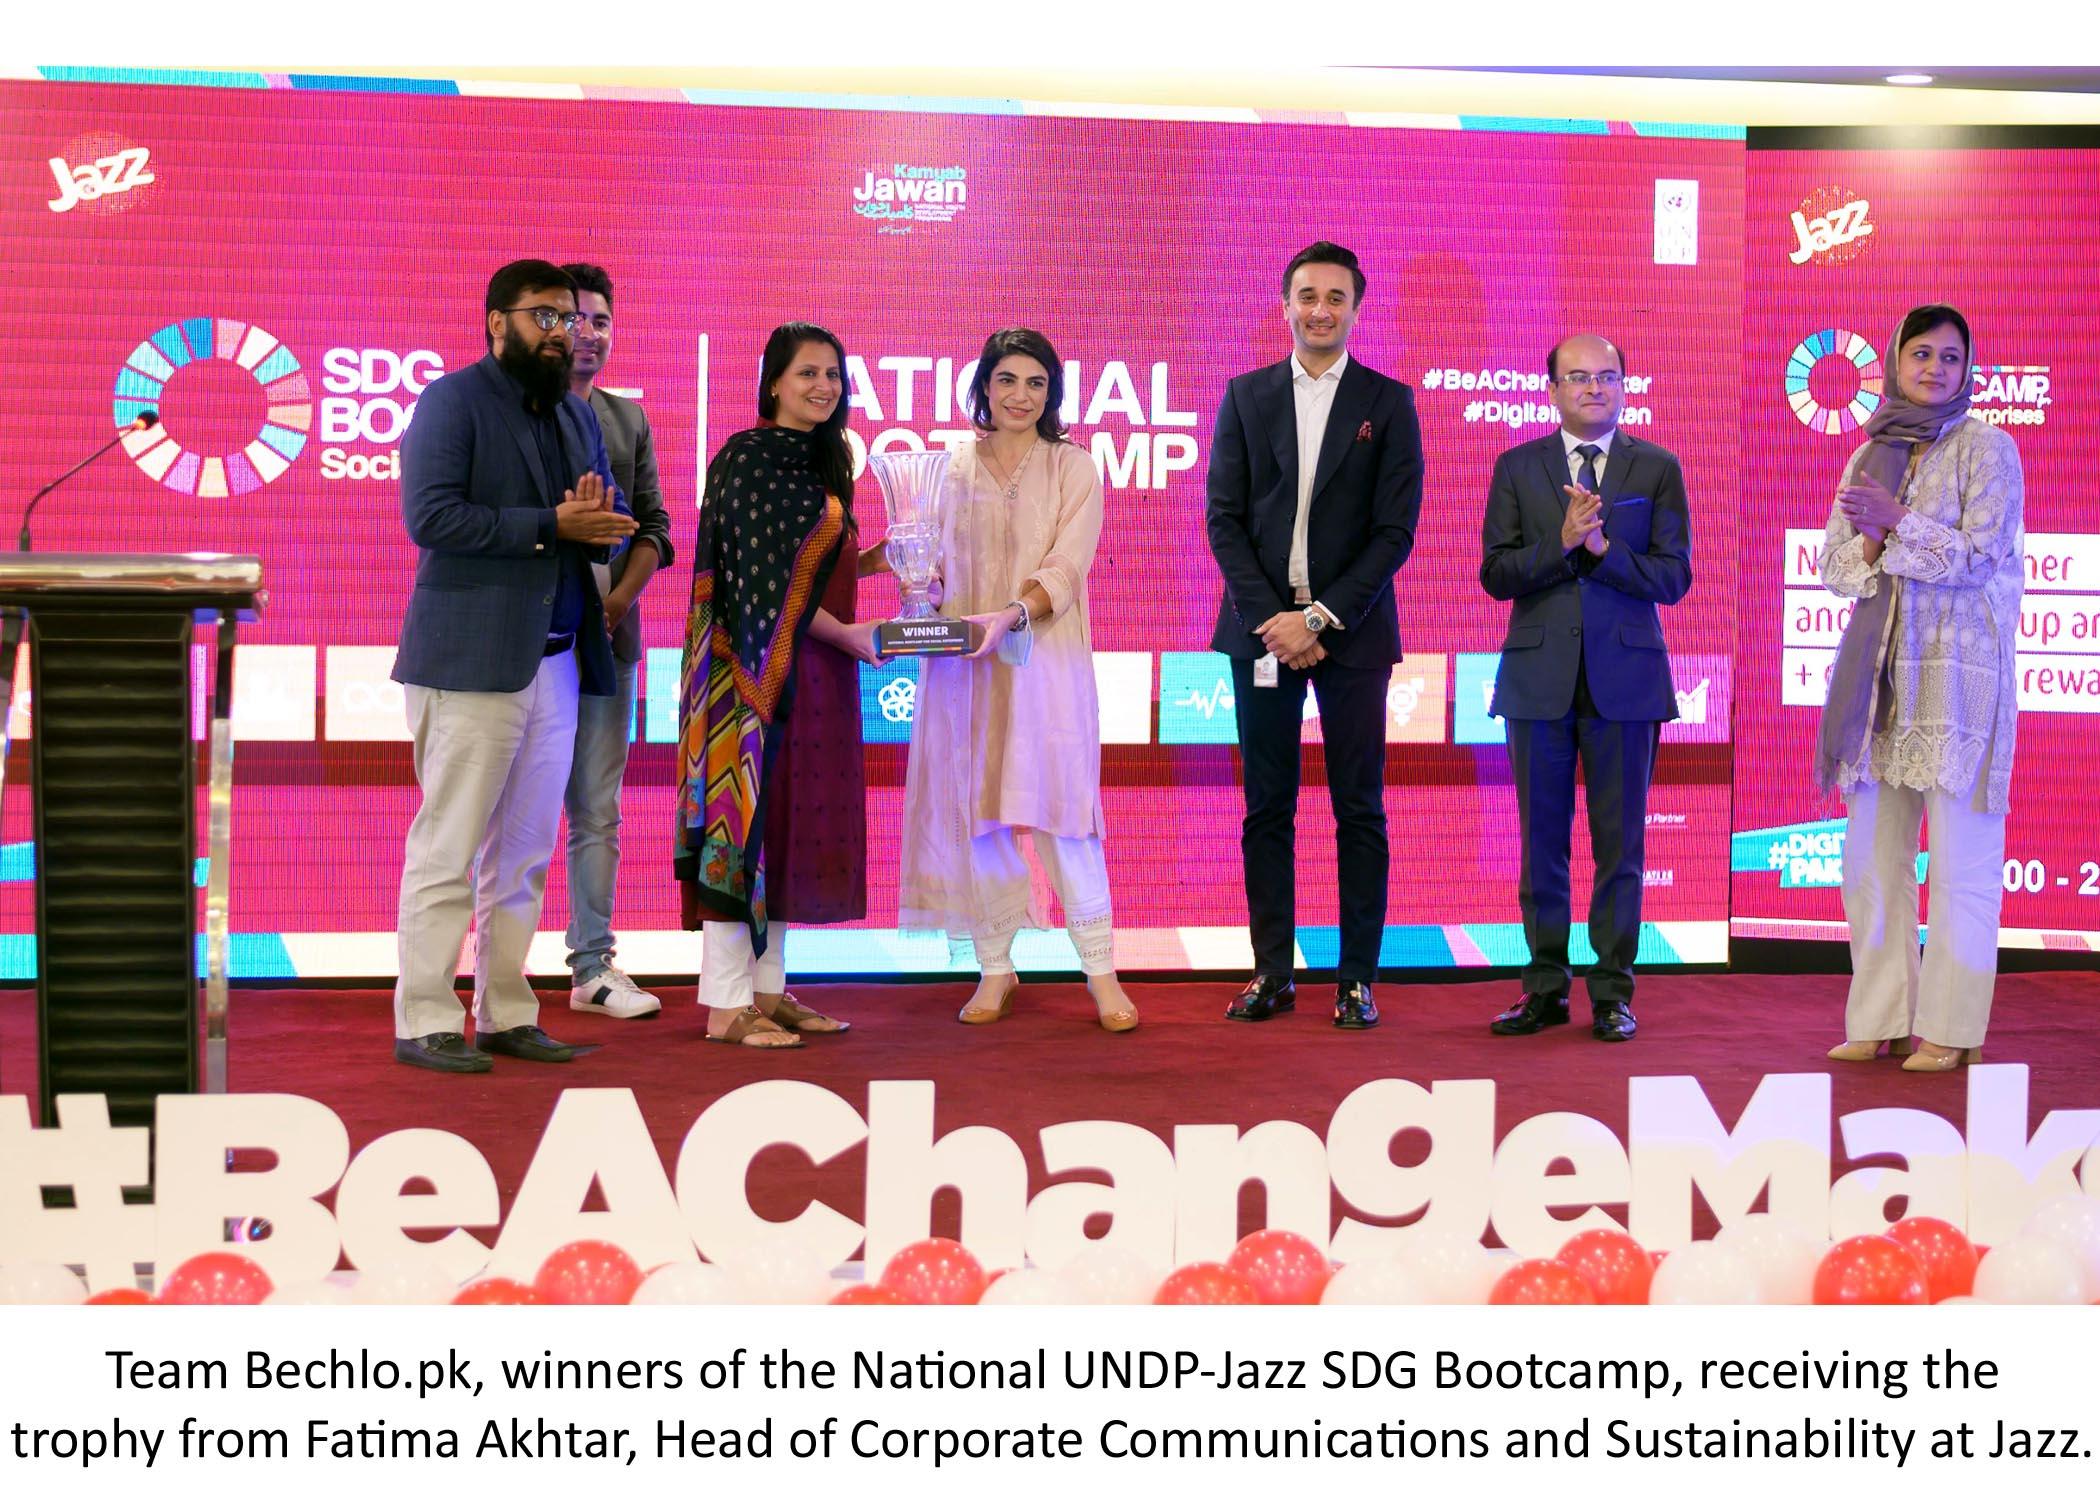 National UNDP-Jazz SDG Bootcamp concludes; Bechlo.pk bags top prize